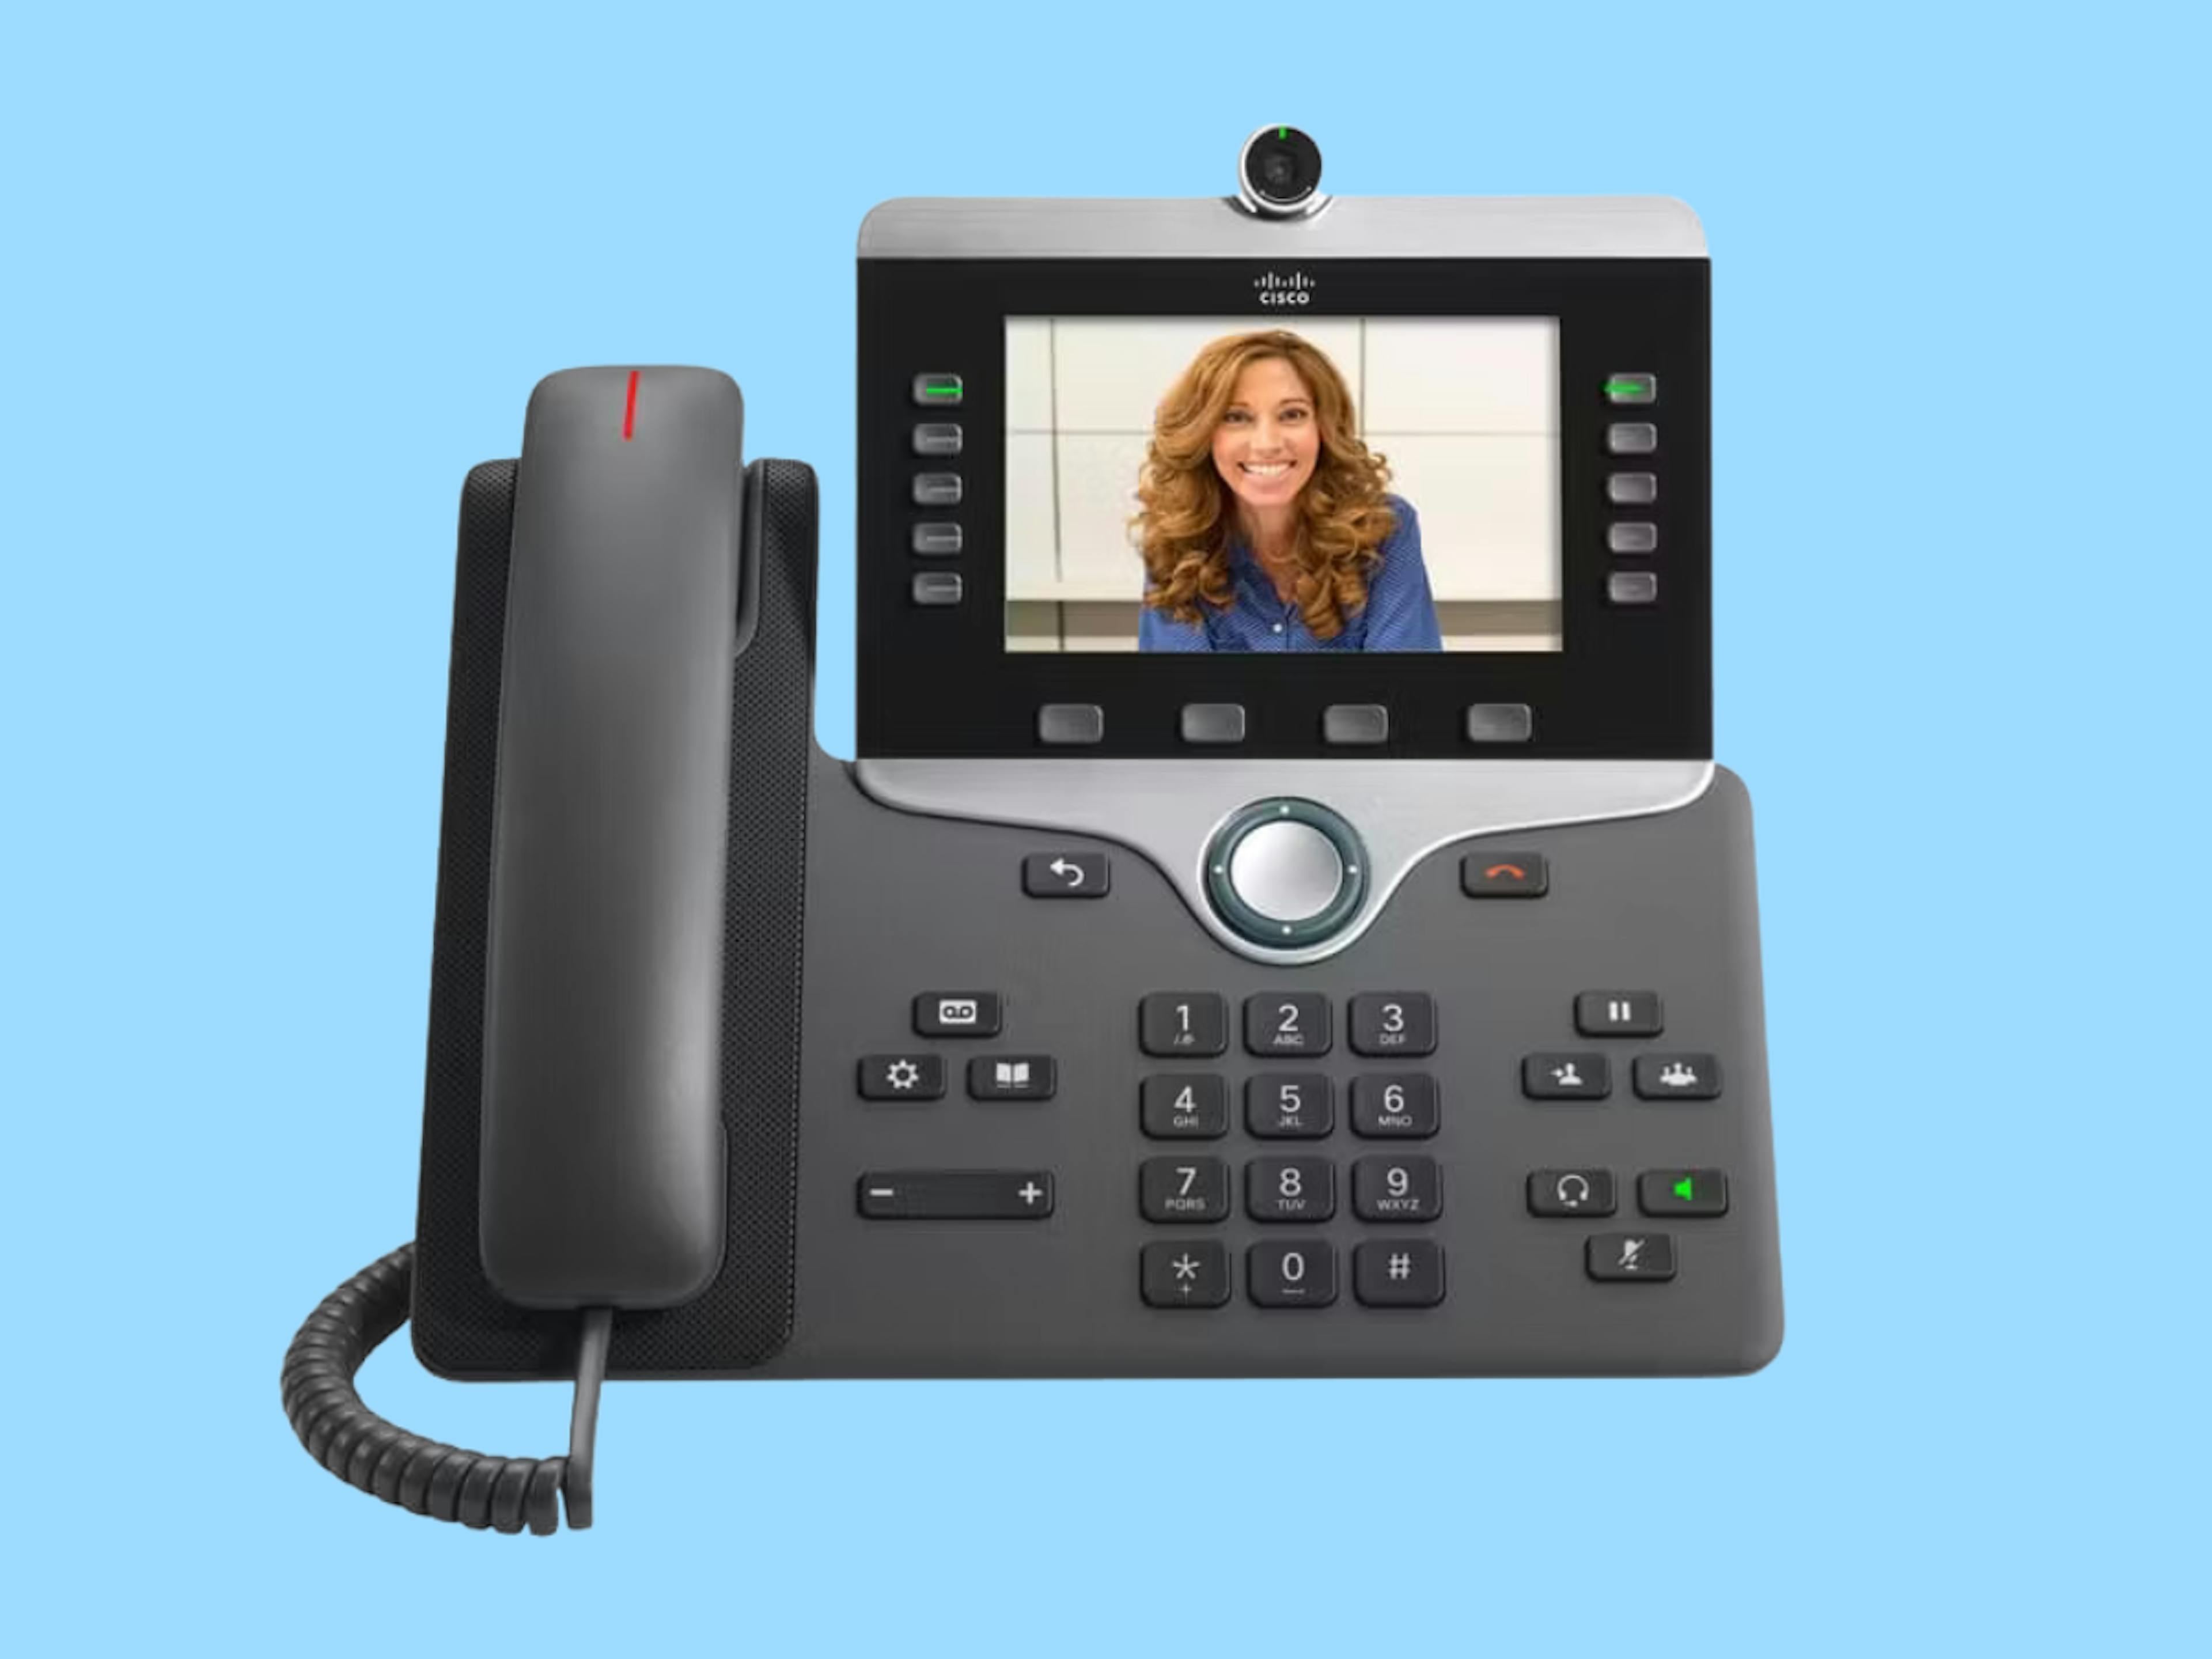 Cisco 8845 VoIP Business Phone